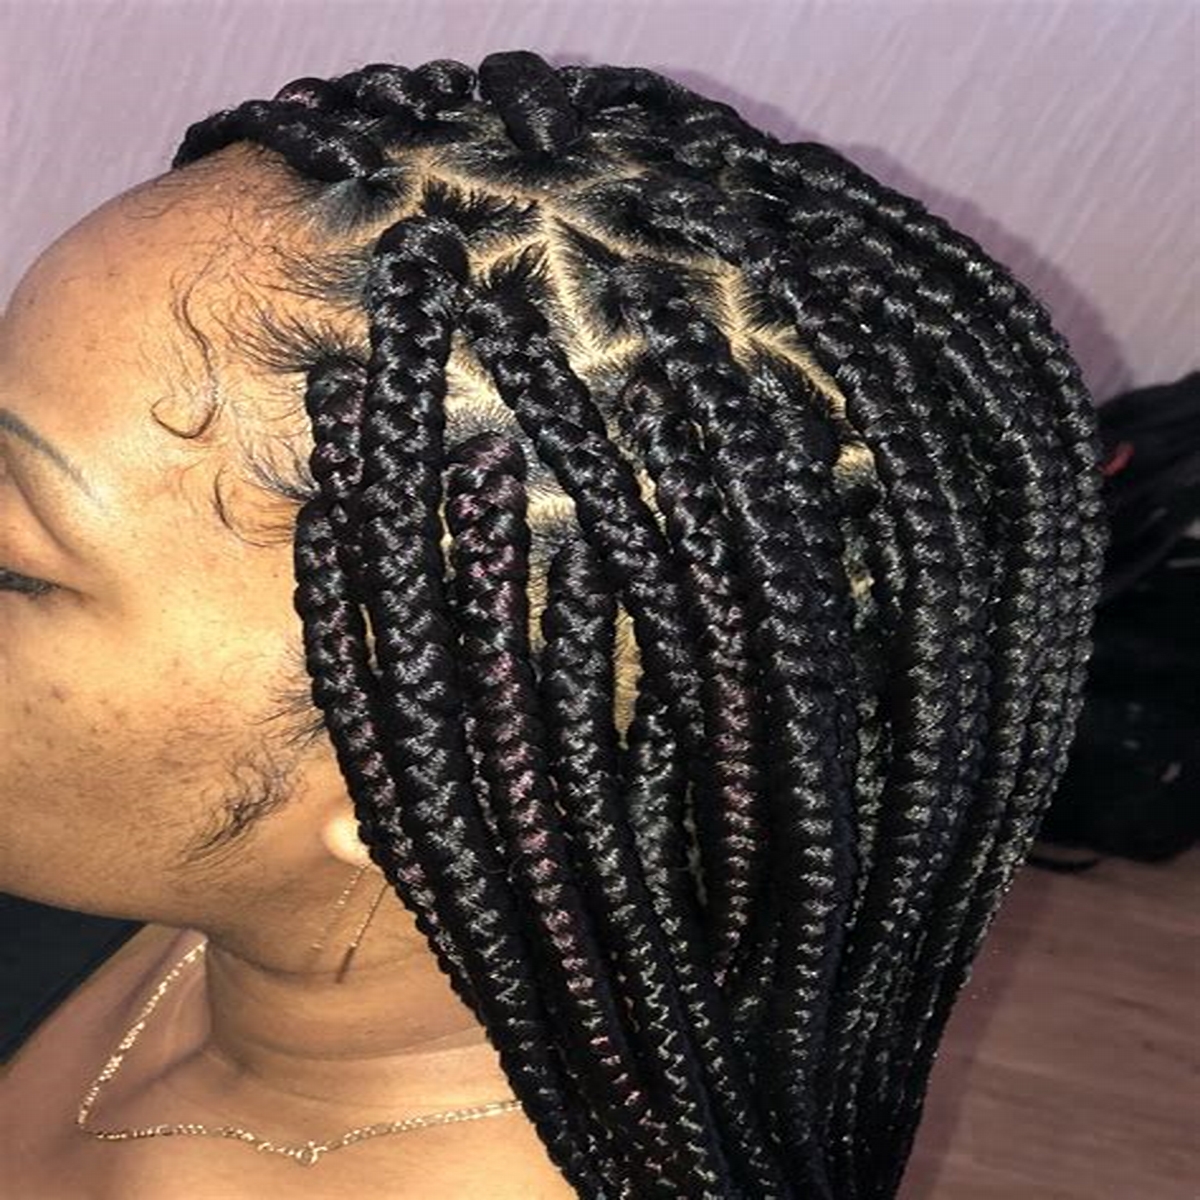 2024 Places to get braids done near me reviews. drawing